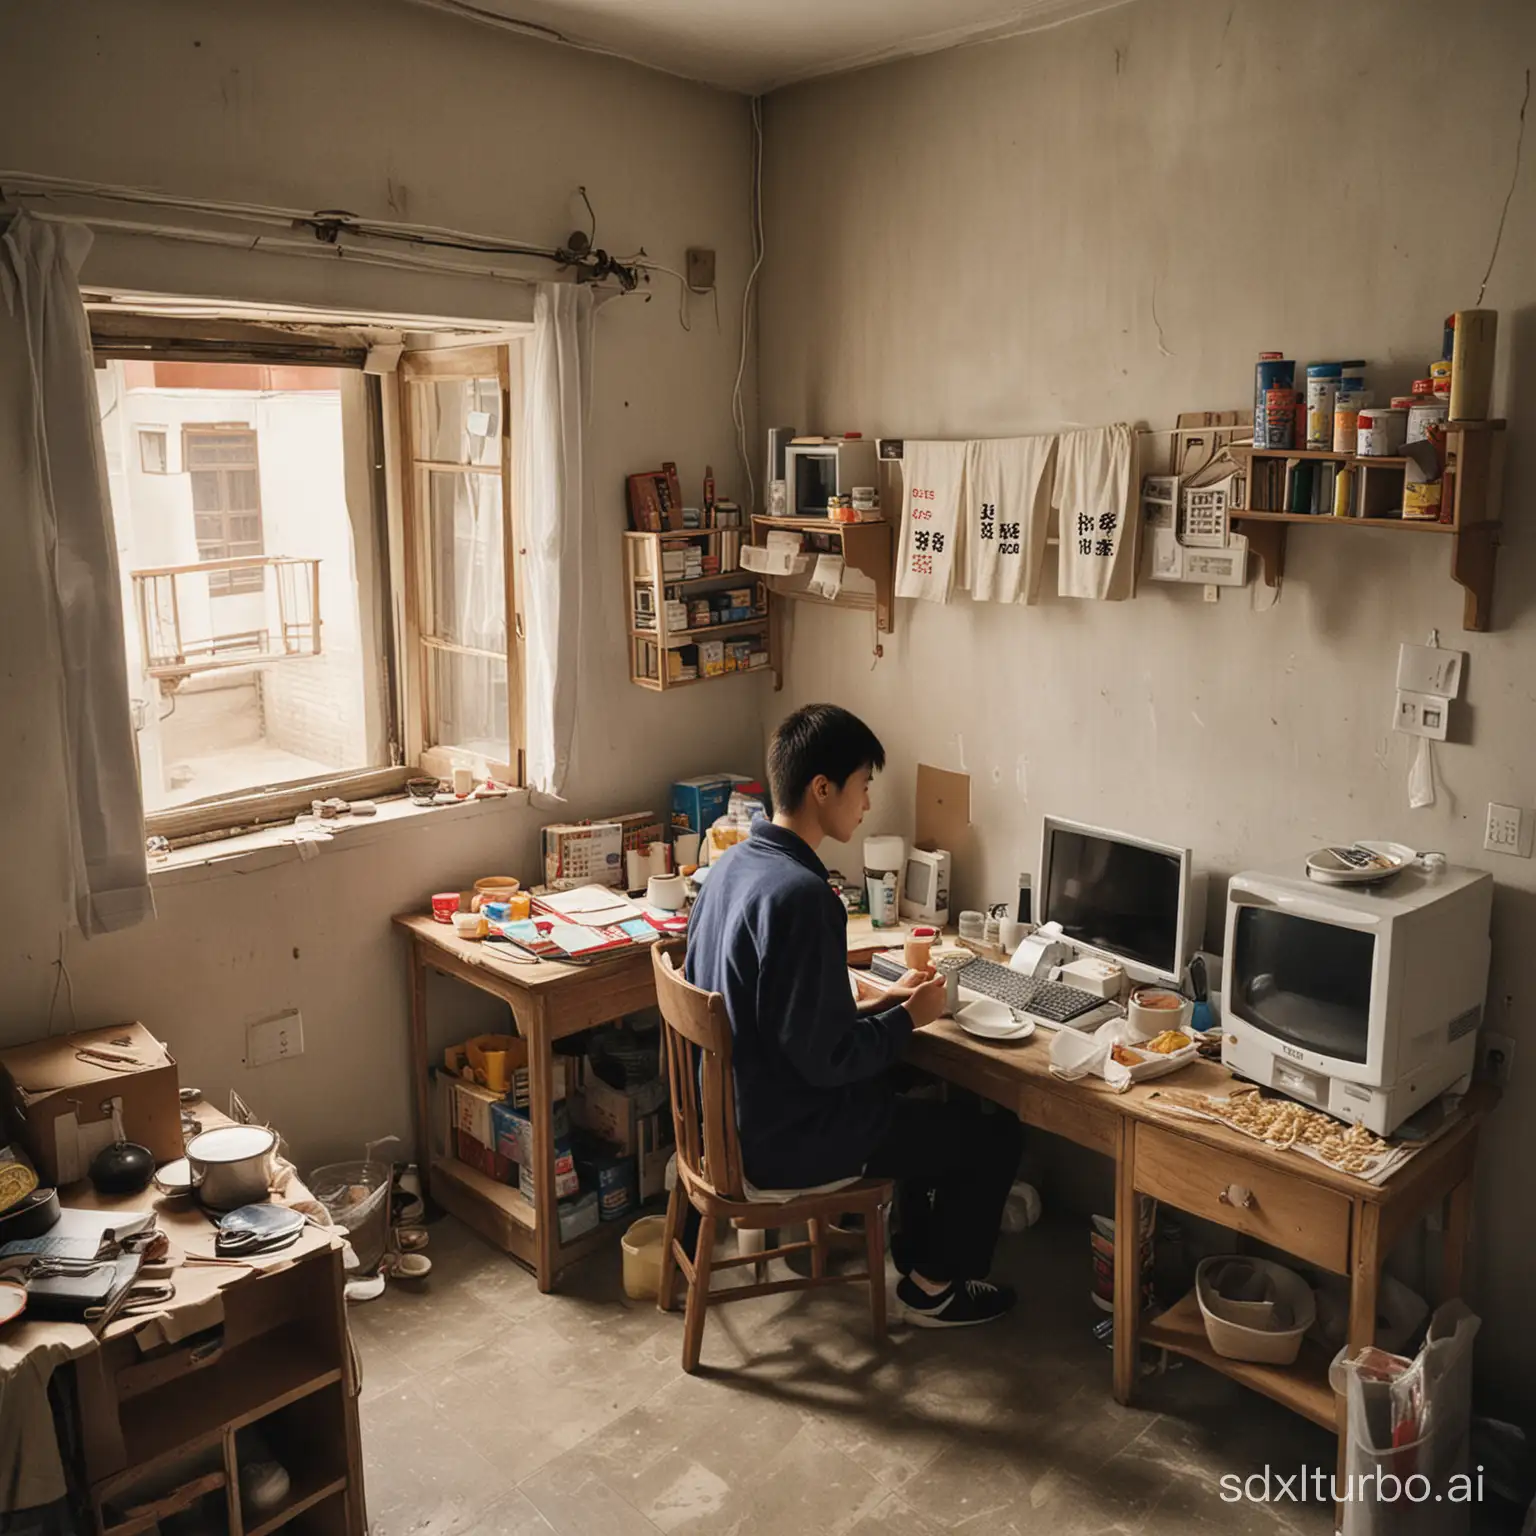 1000 yuan (low income):

Residence: a small rented house, possibly a collective dormitory on the outskirts of the city, with simple furniture and crowded space.
Characters: There is a young person in the house, with clear facial features, working or studying hard in front of an old computer, with a cup of instant noodles as dinner.